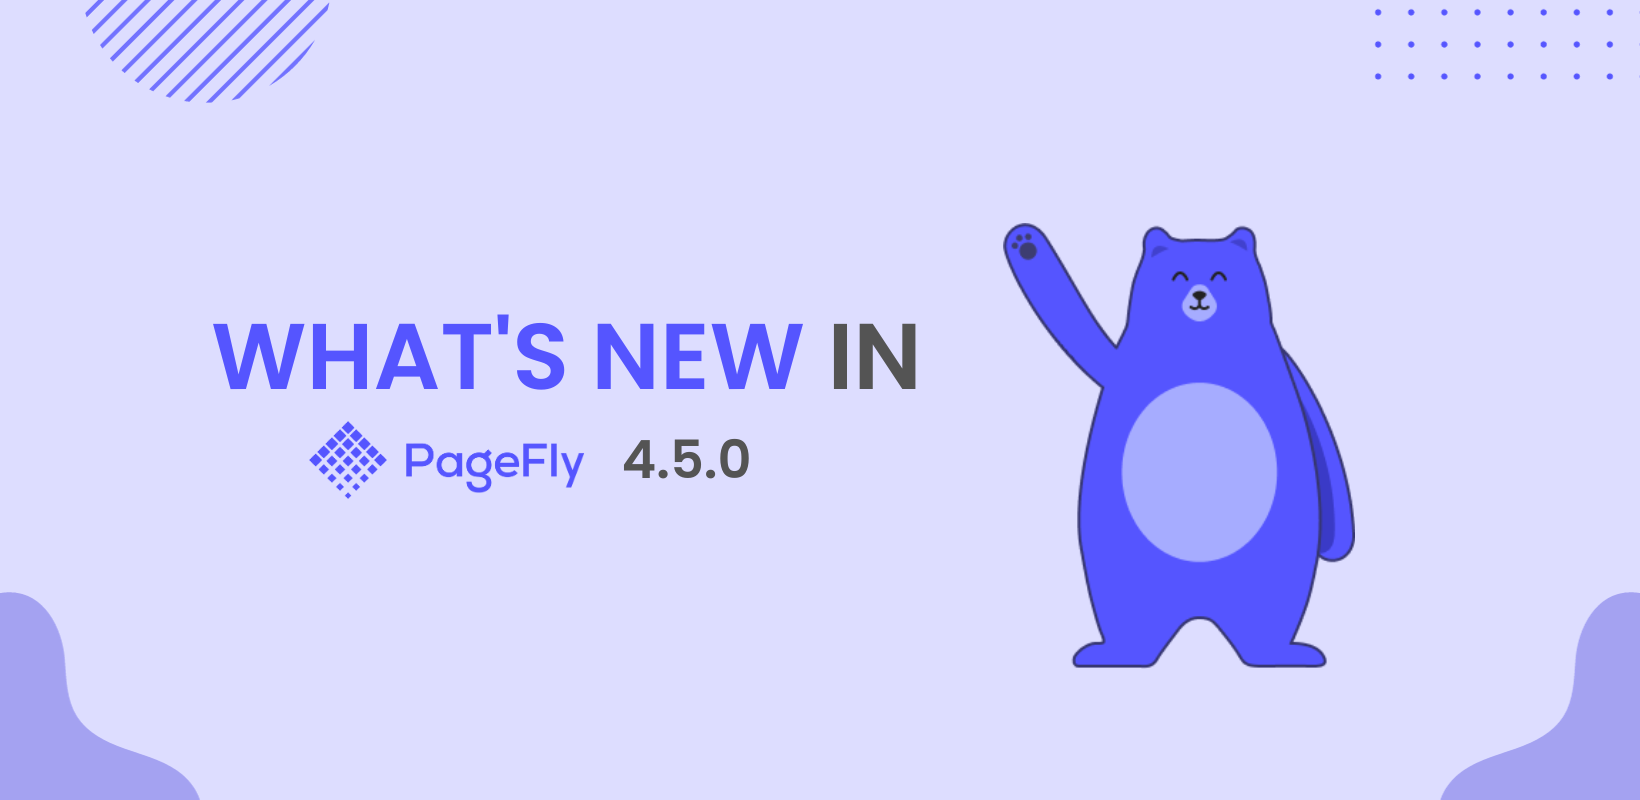 PageFly 4.5.0: New Pricing Plan. Improved UI Dashboard. Sprout and Vibe Integration.